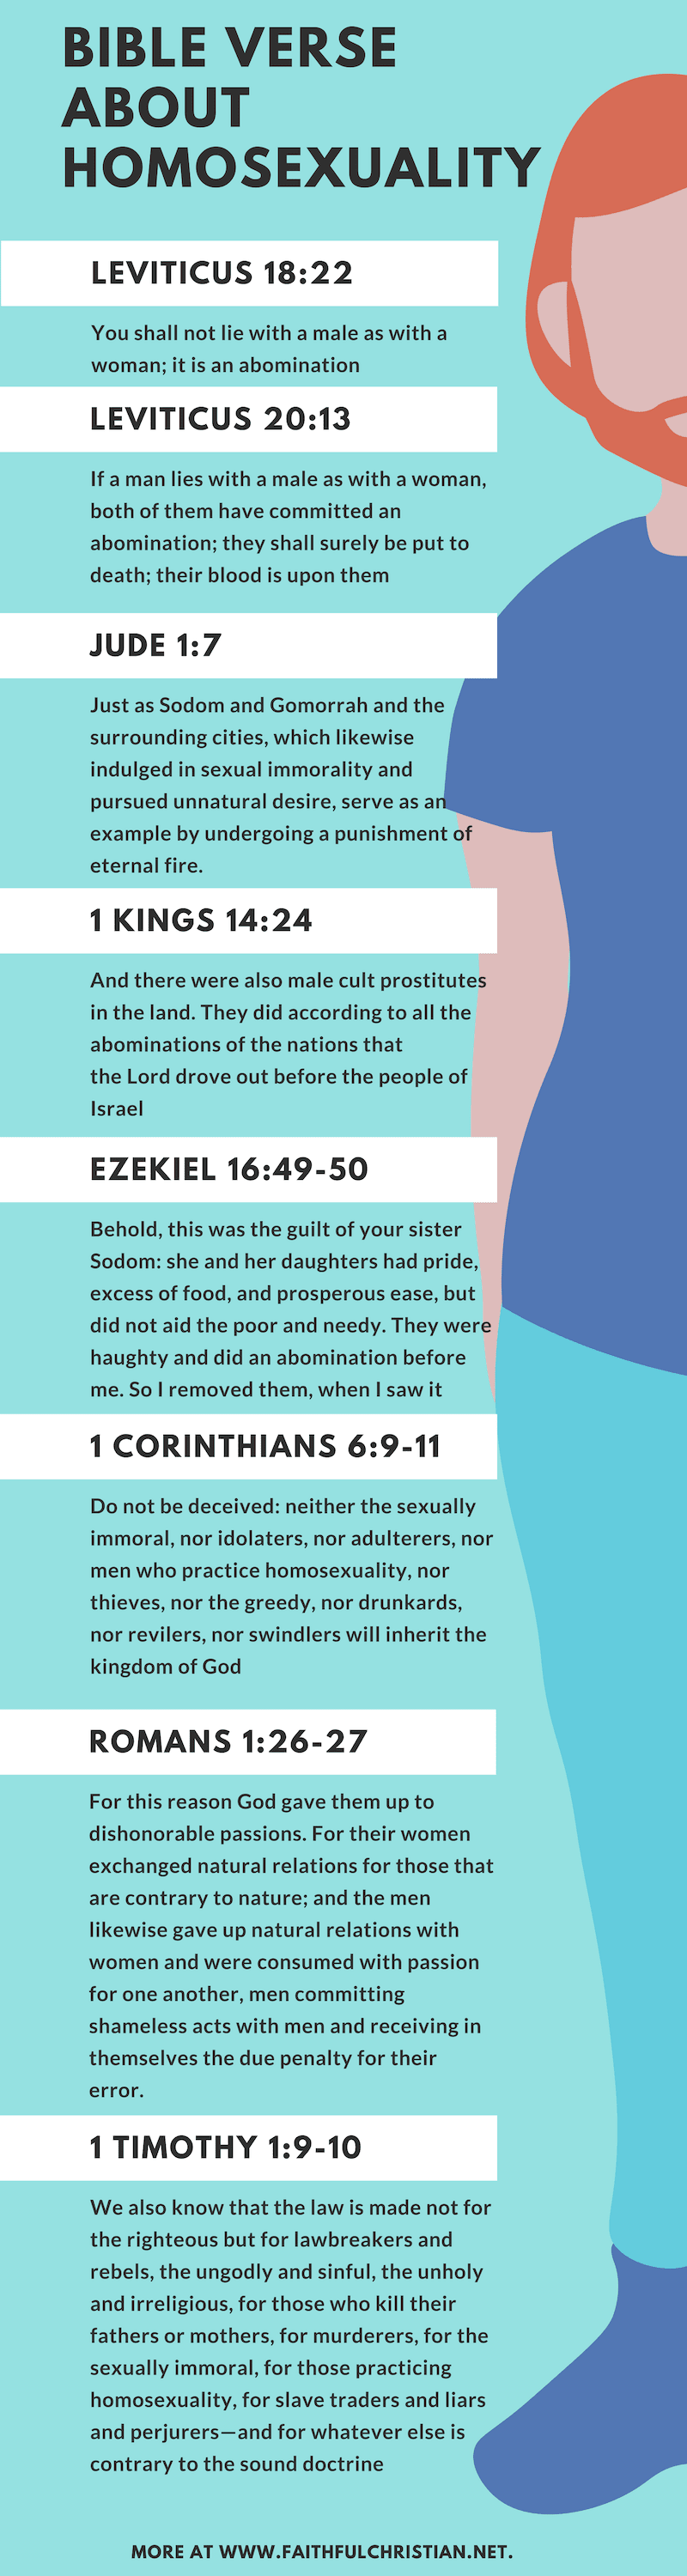 Bible verse about homosexuality